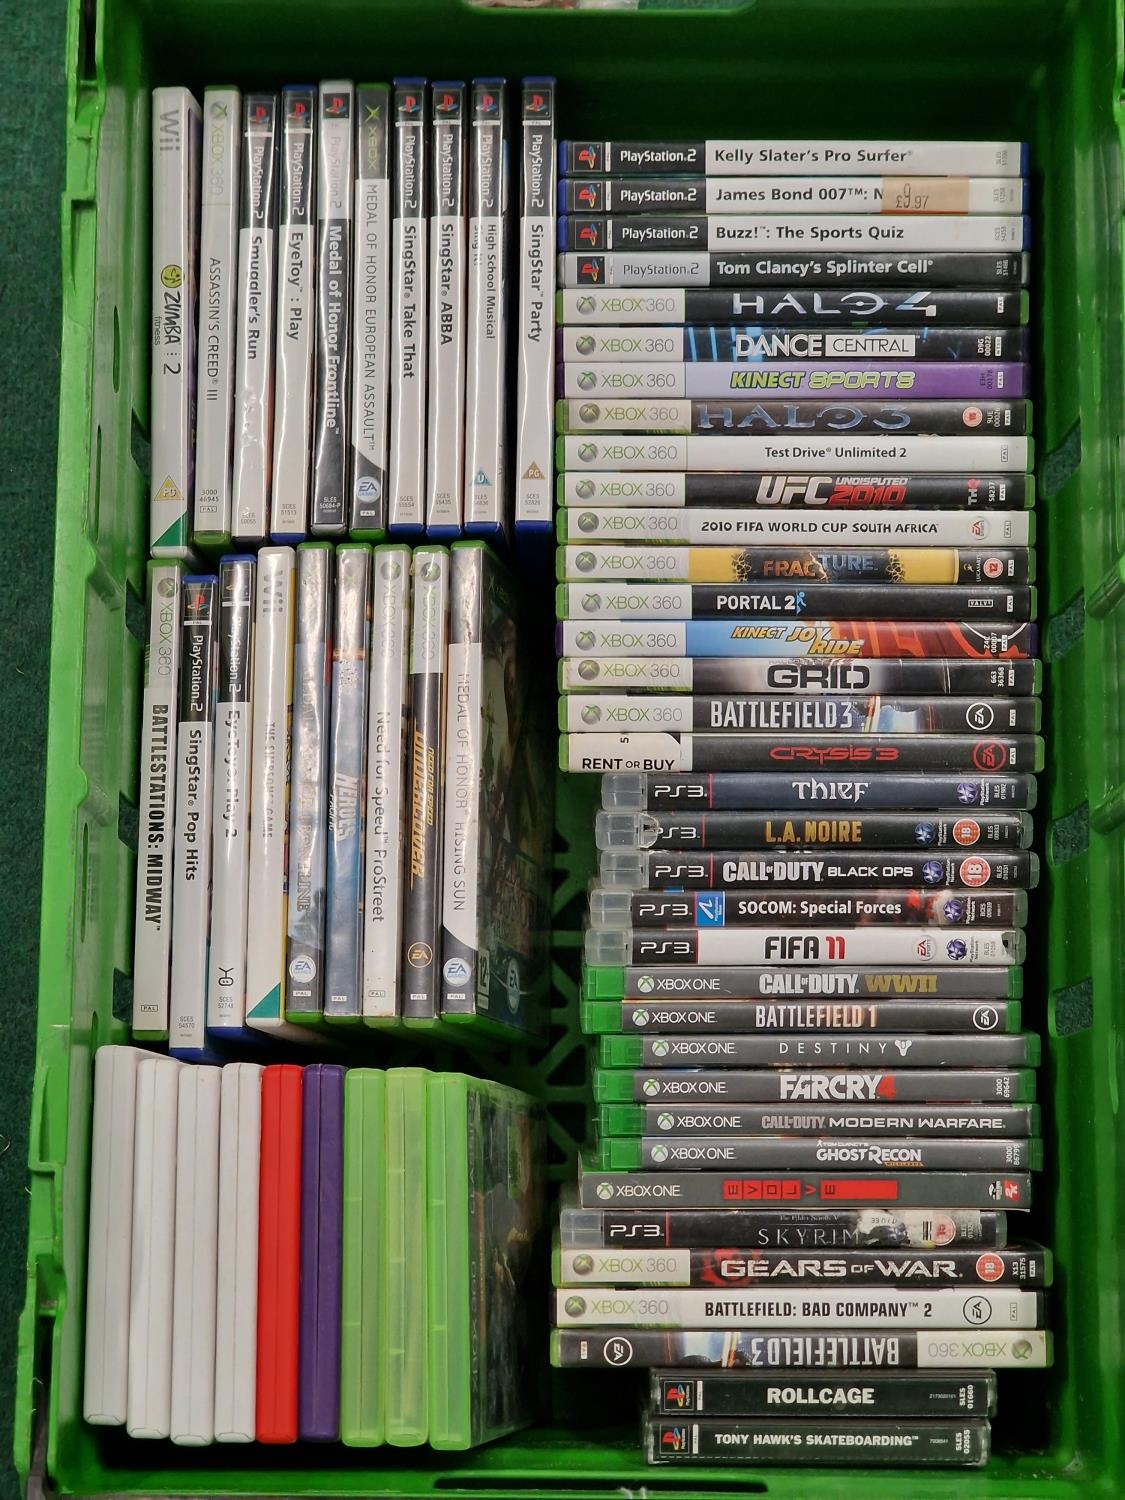 Crate of various pc / gaming disc’s to include makes - PlayStation 1 / 2 & 3 along with Wii - XBox